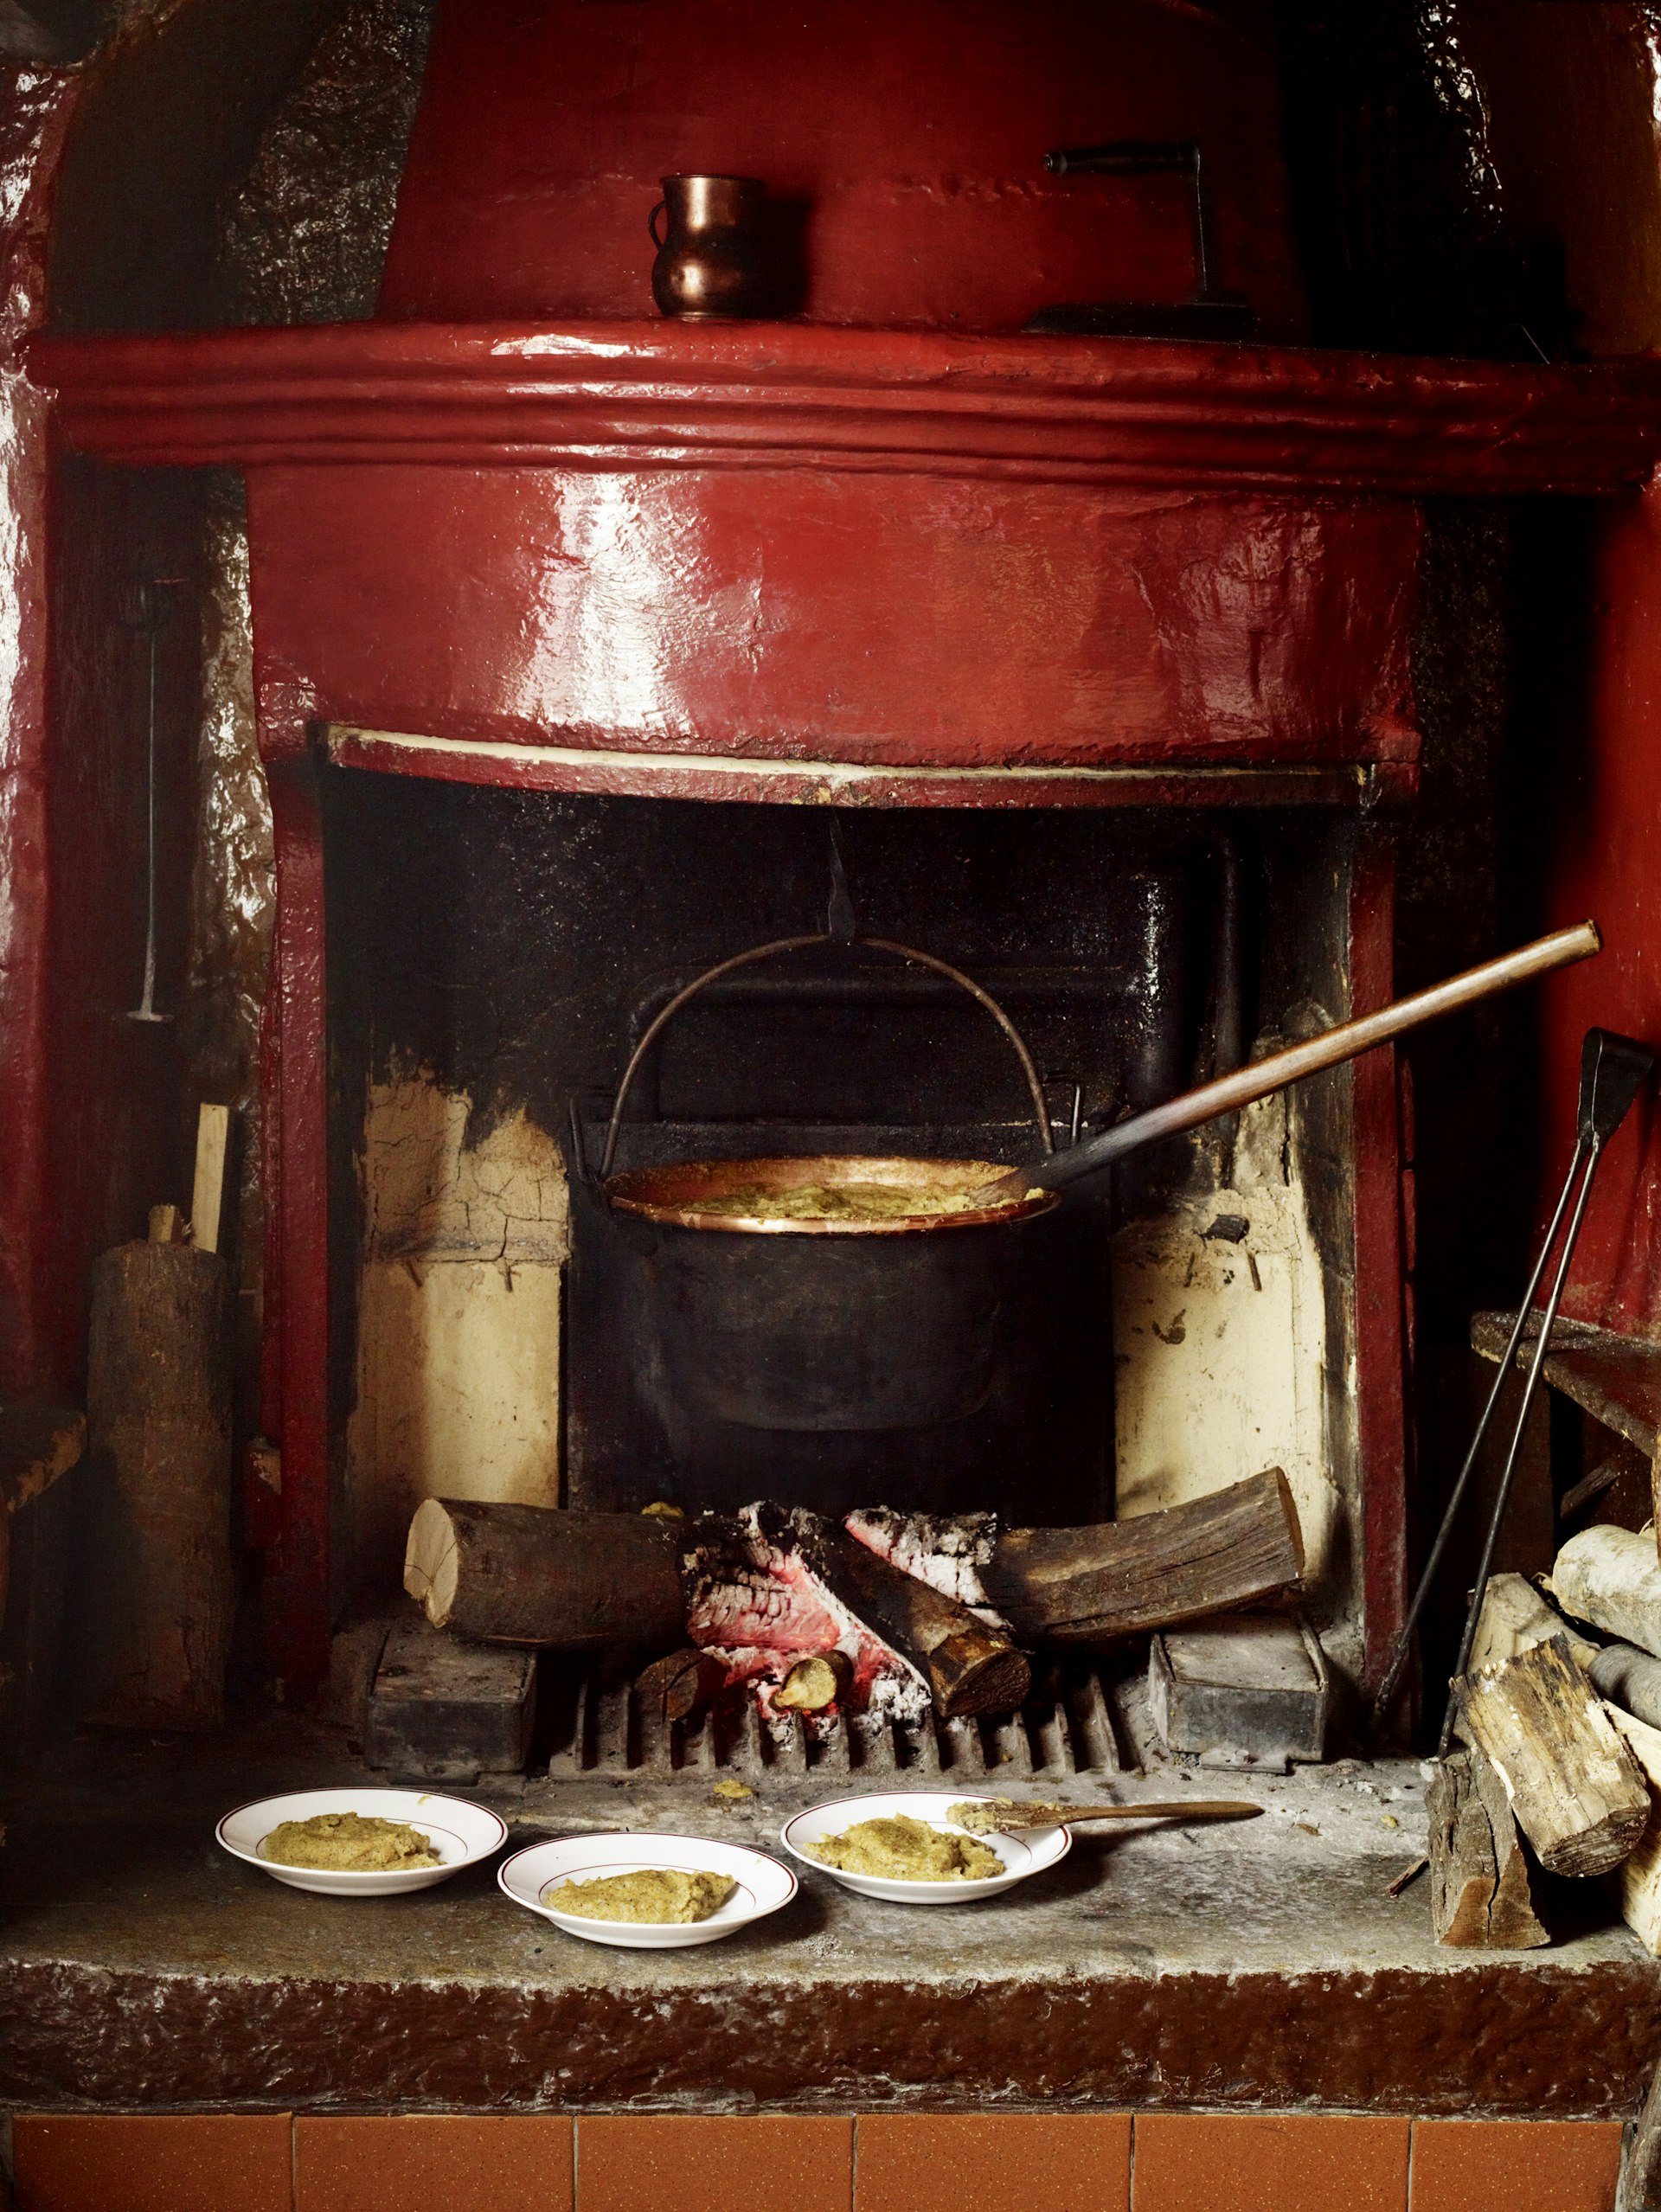 Polenta cooking over a fire in a red fireplace